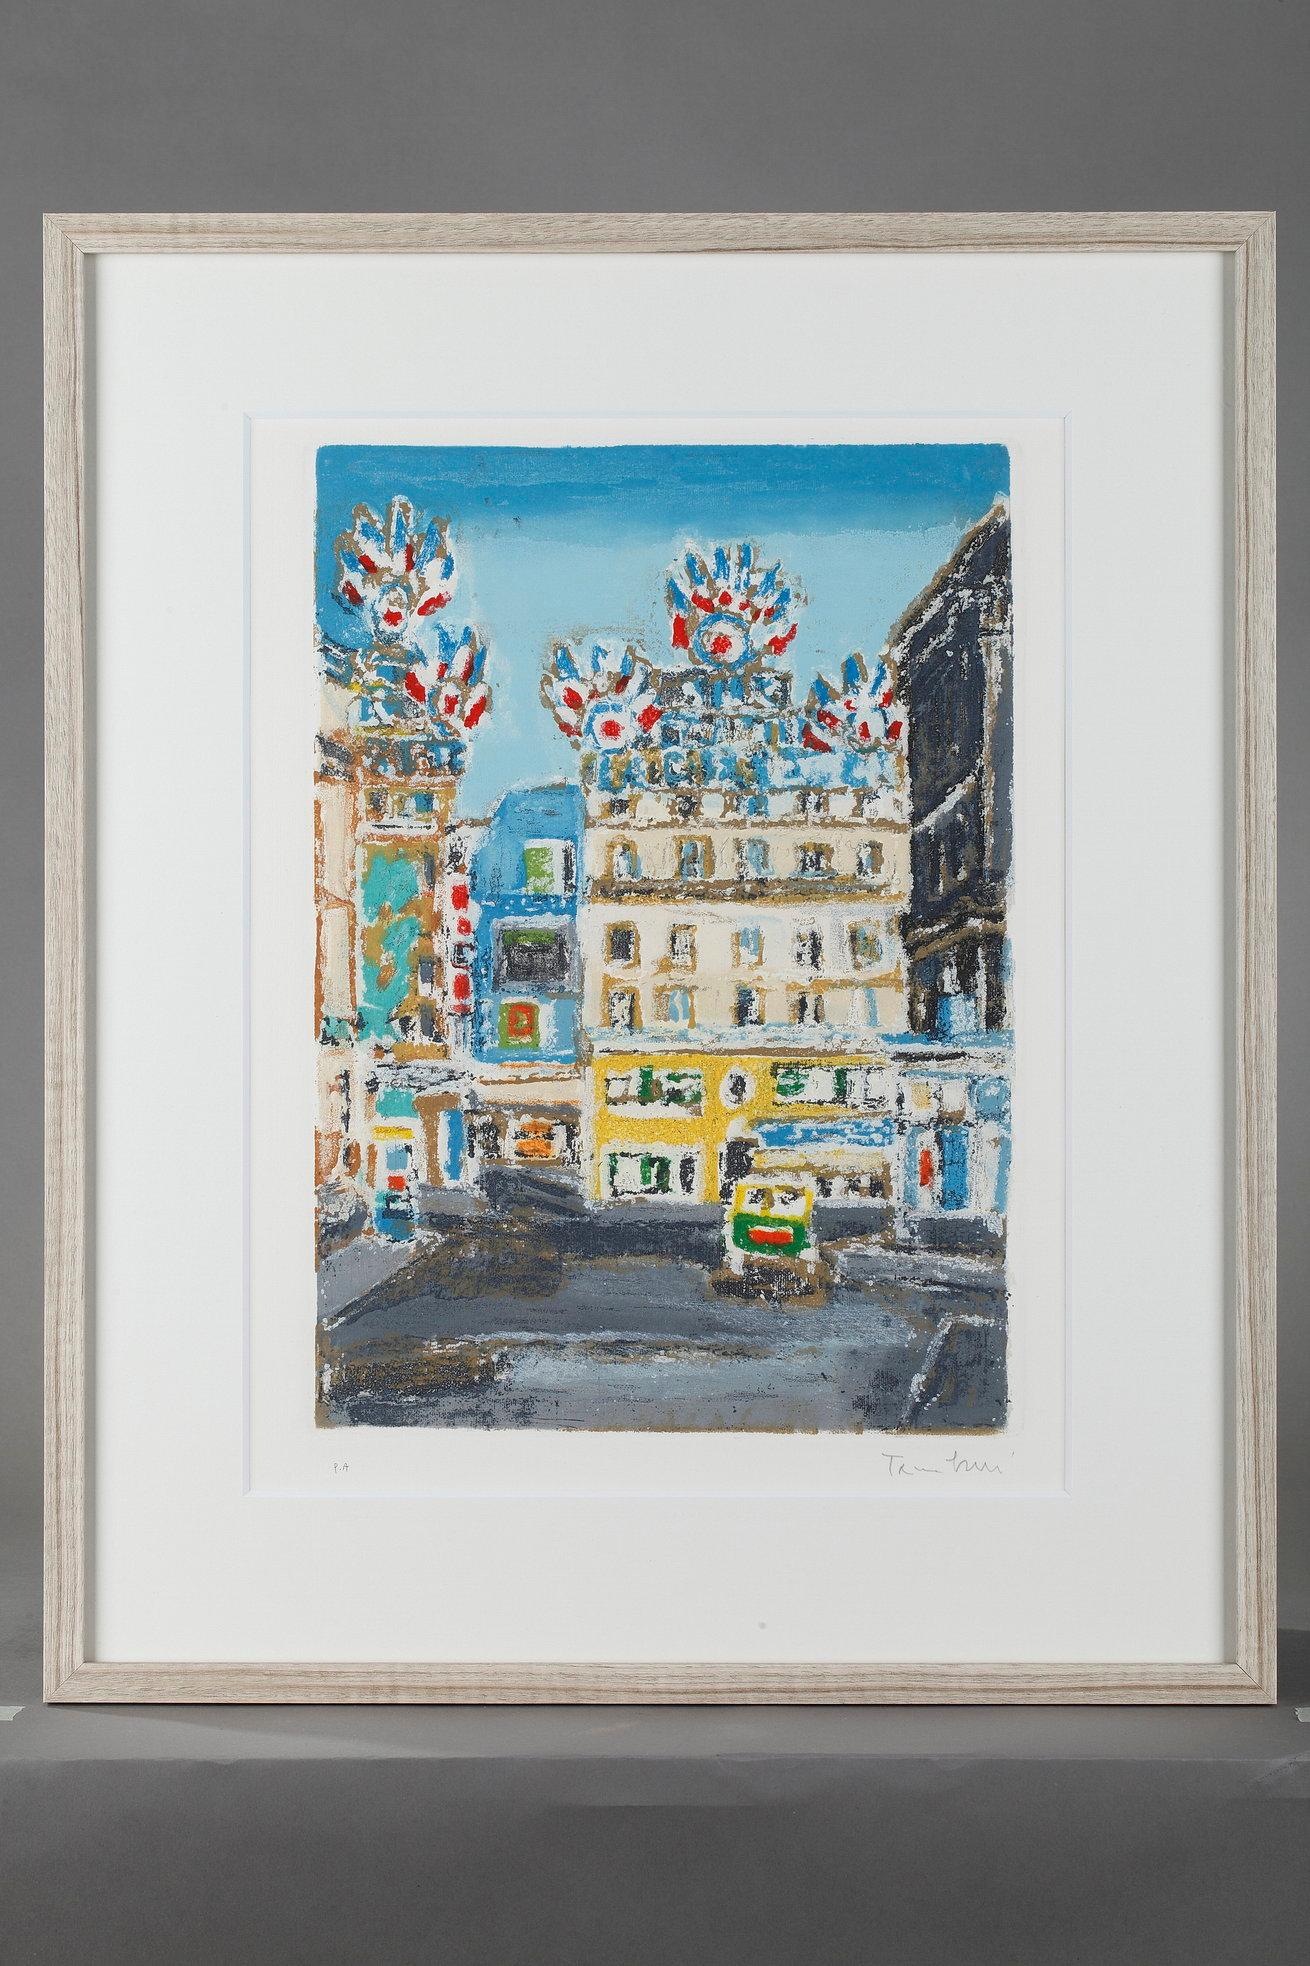 Four framed etchings by Orfeo Tamburini in aquatint in colors representing the streets of the different districts of Paris. Each one is stamped by the art publisher Il Cigno and signed by the artist in pencil. These prints are limited to 130 copies